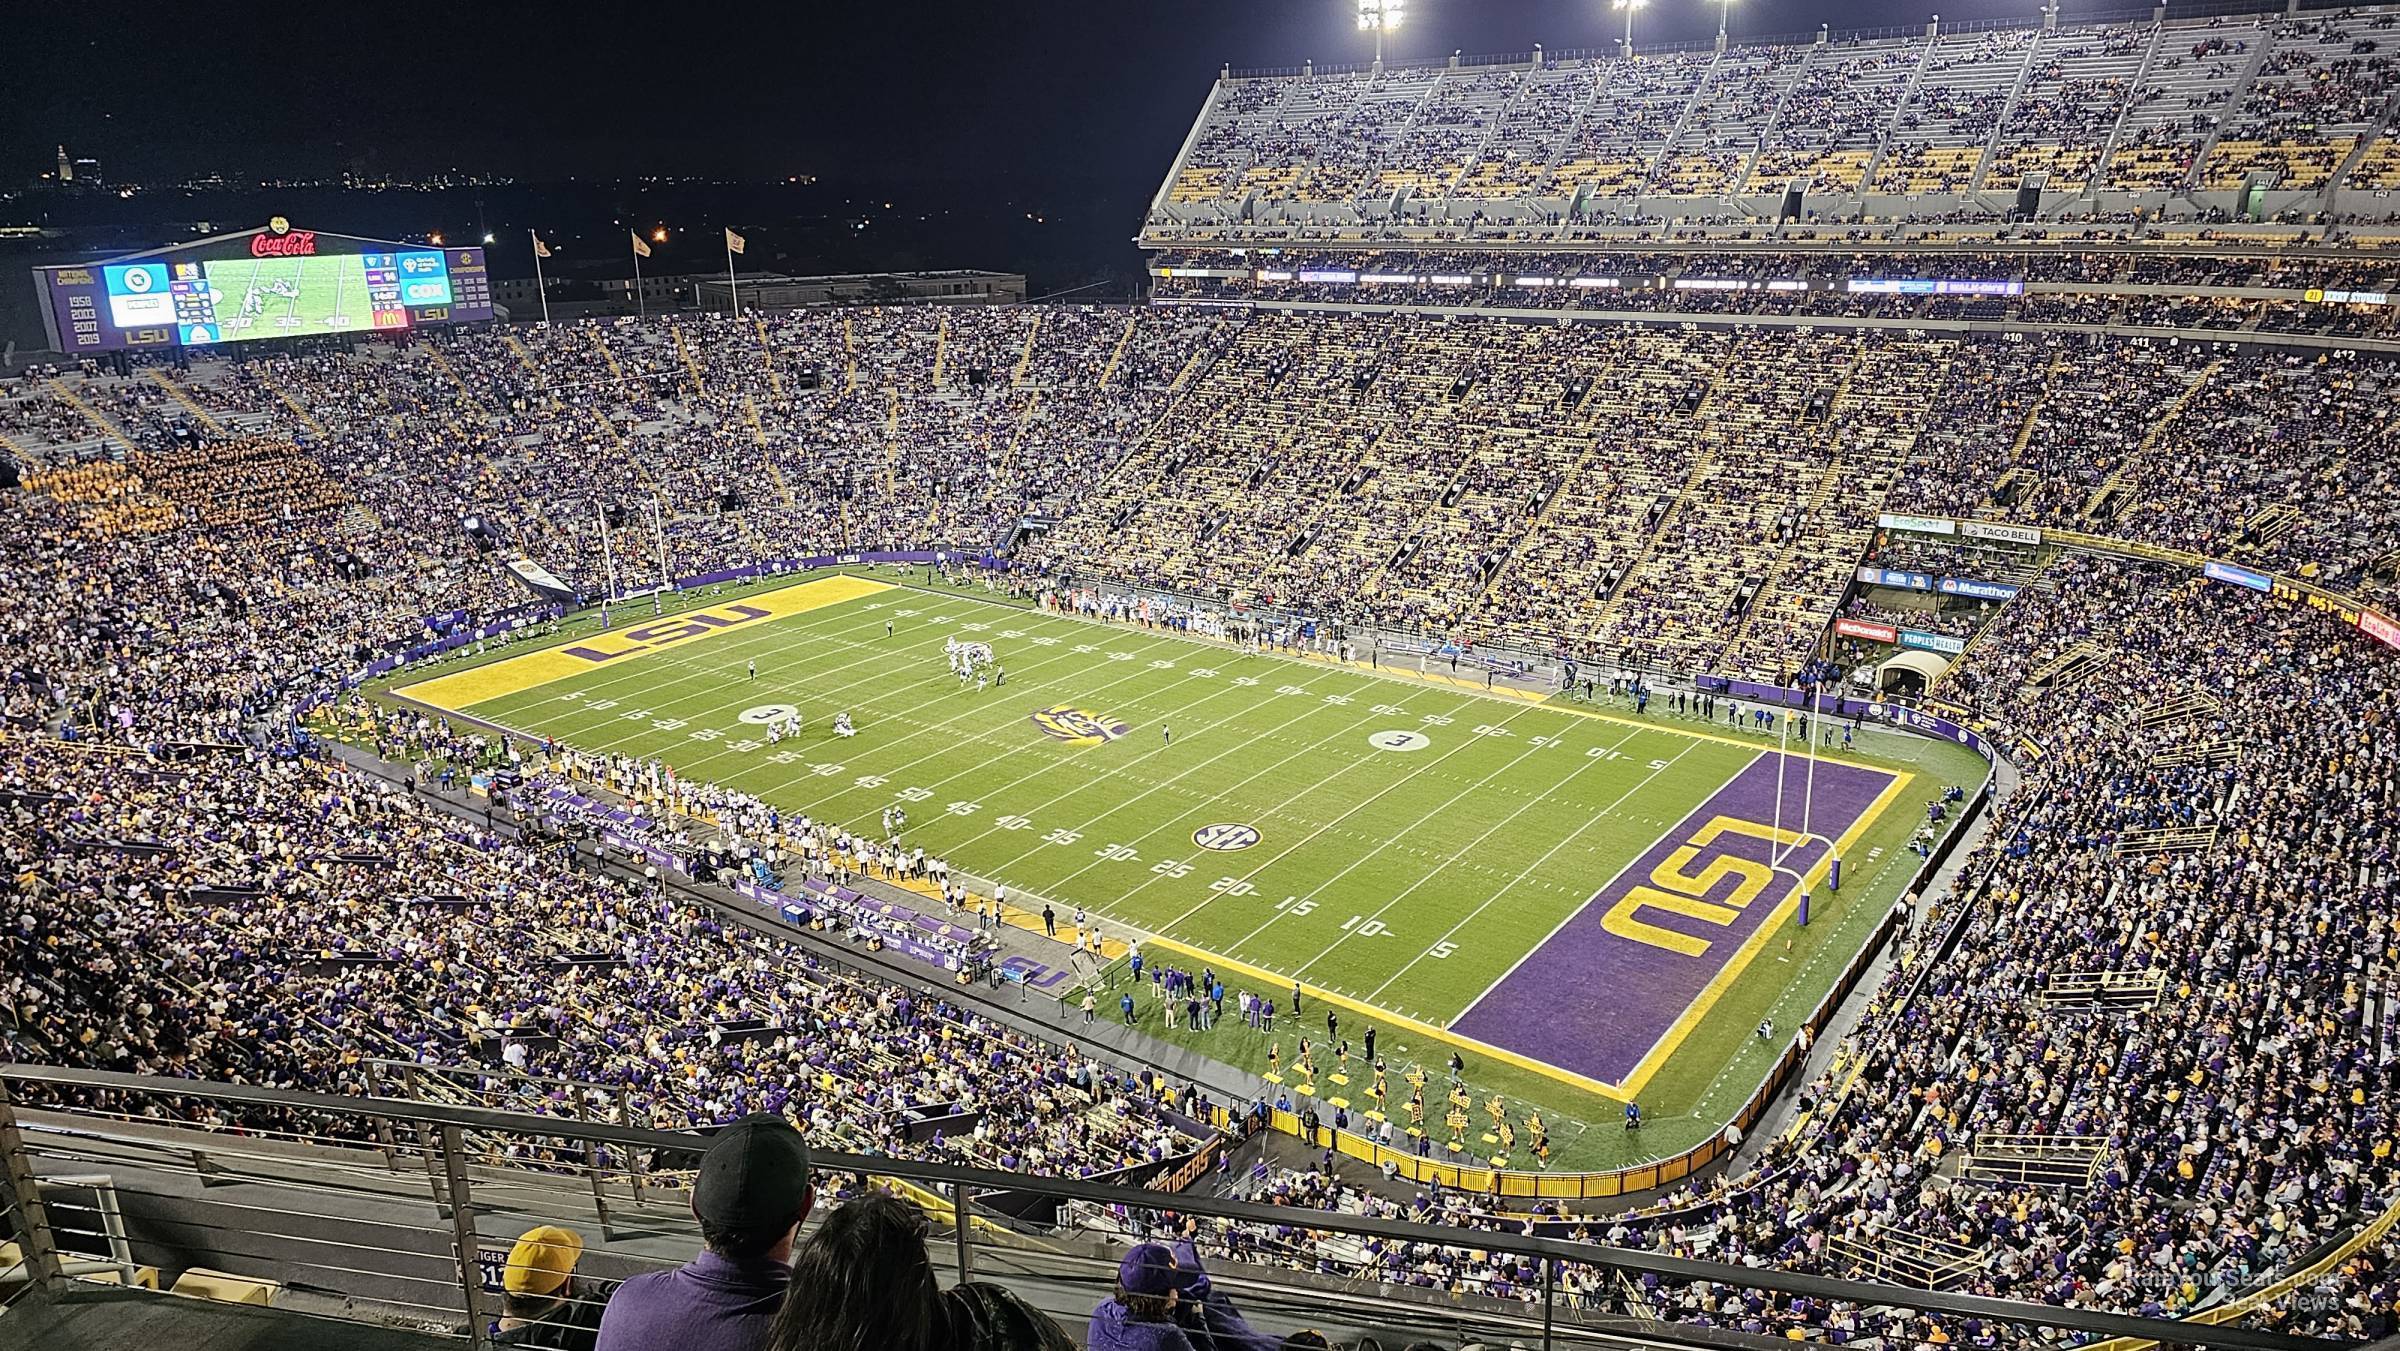 section 611, row 1 seat view  - tiger stadium